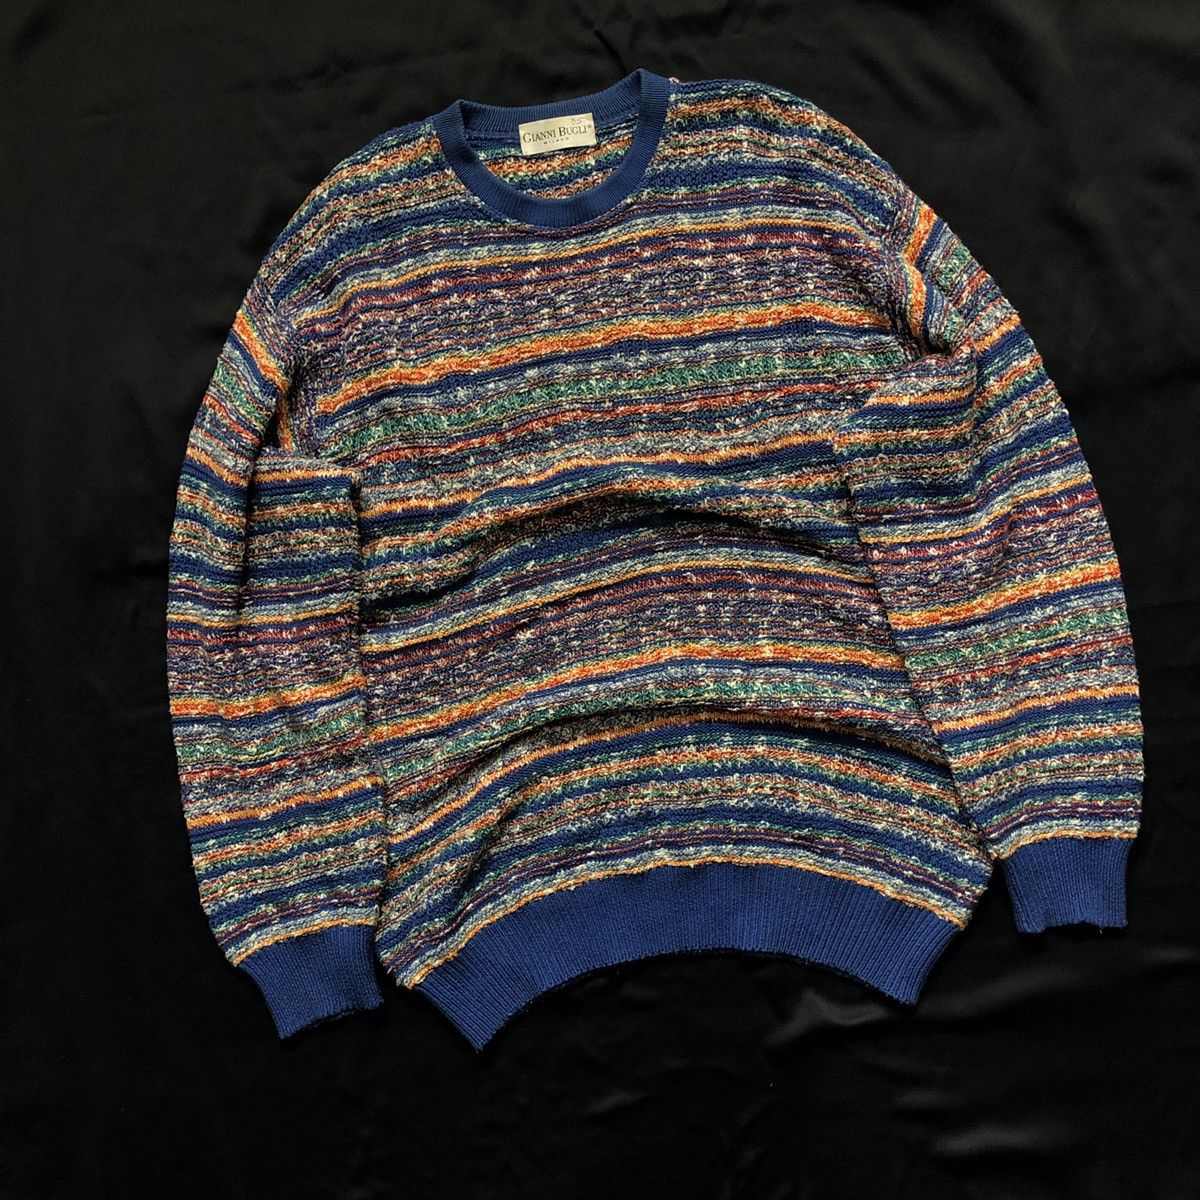 Coogi Rare vintage Gianni Bugli knit sweater made in Italy hype 80 ...